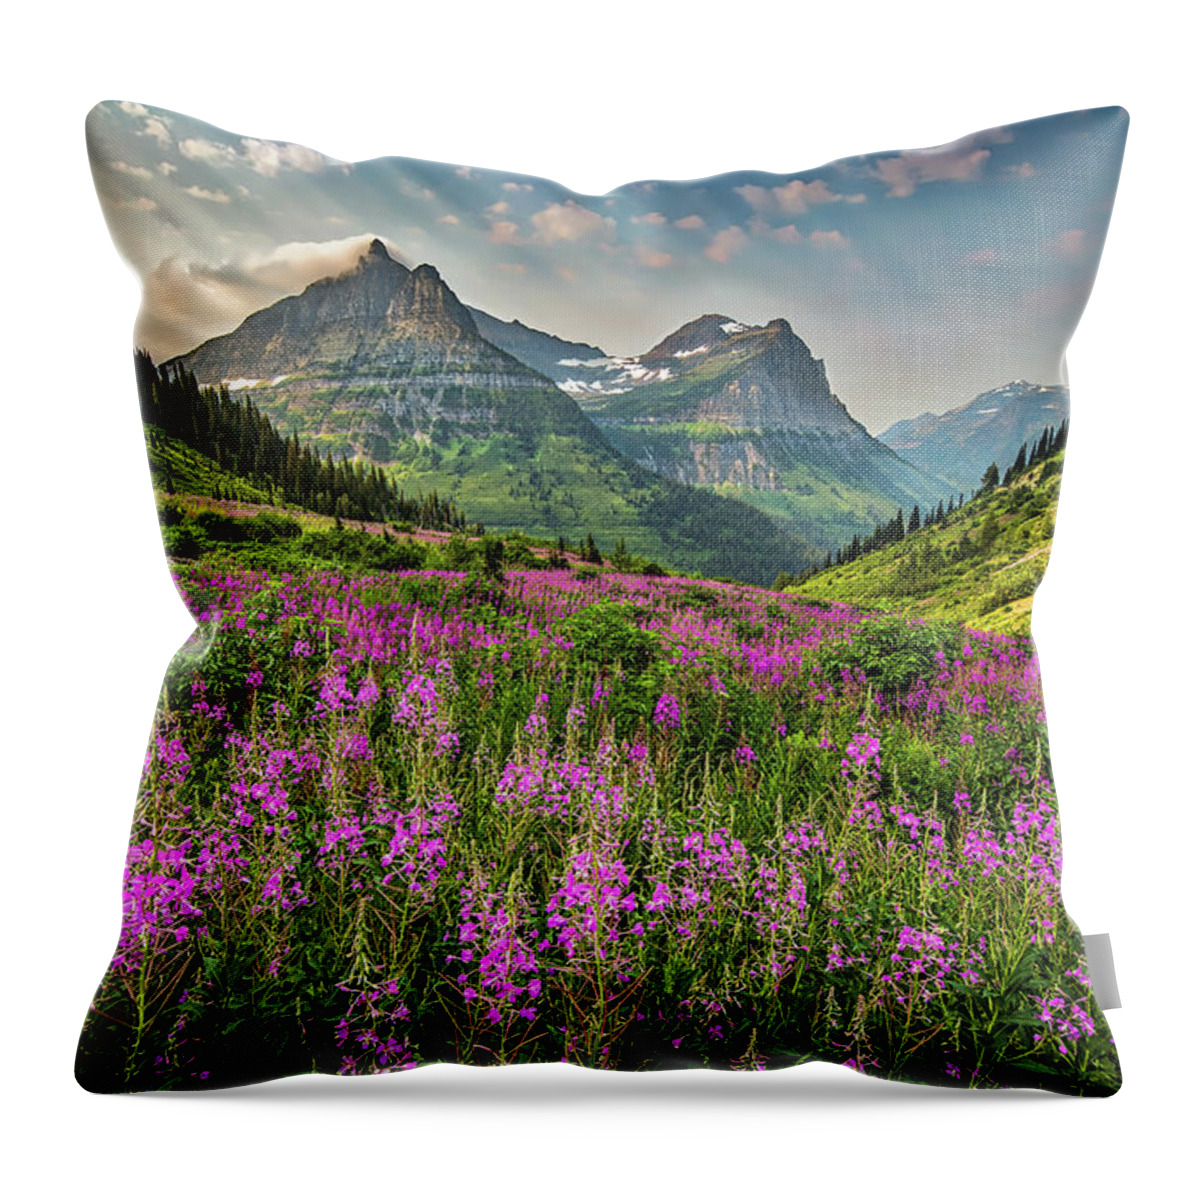 Glacier Throw Pillow featuring the photograph Glacier Meadow by Peter Tellone